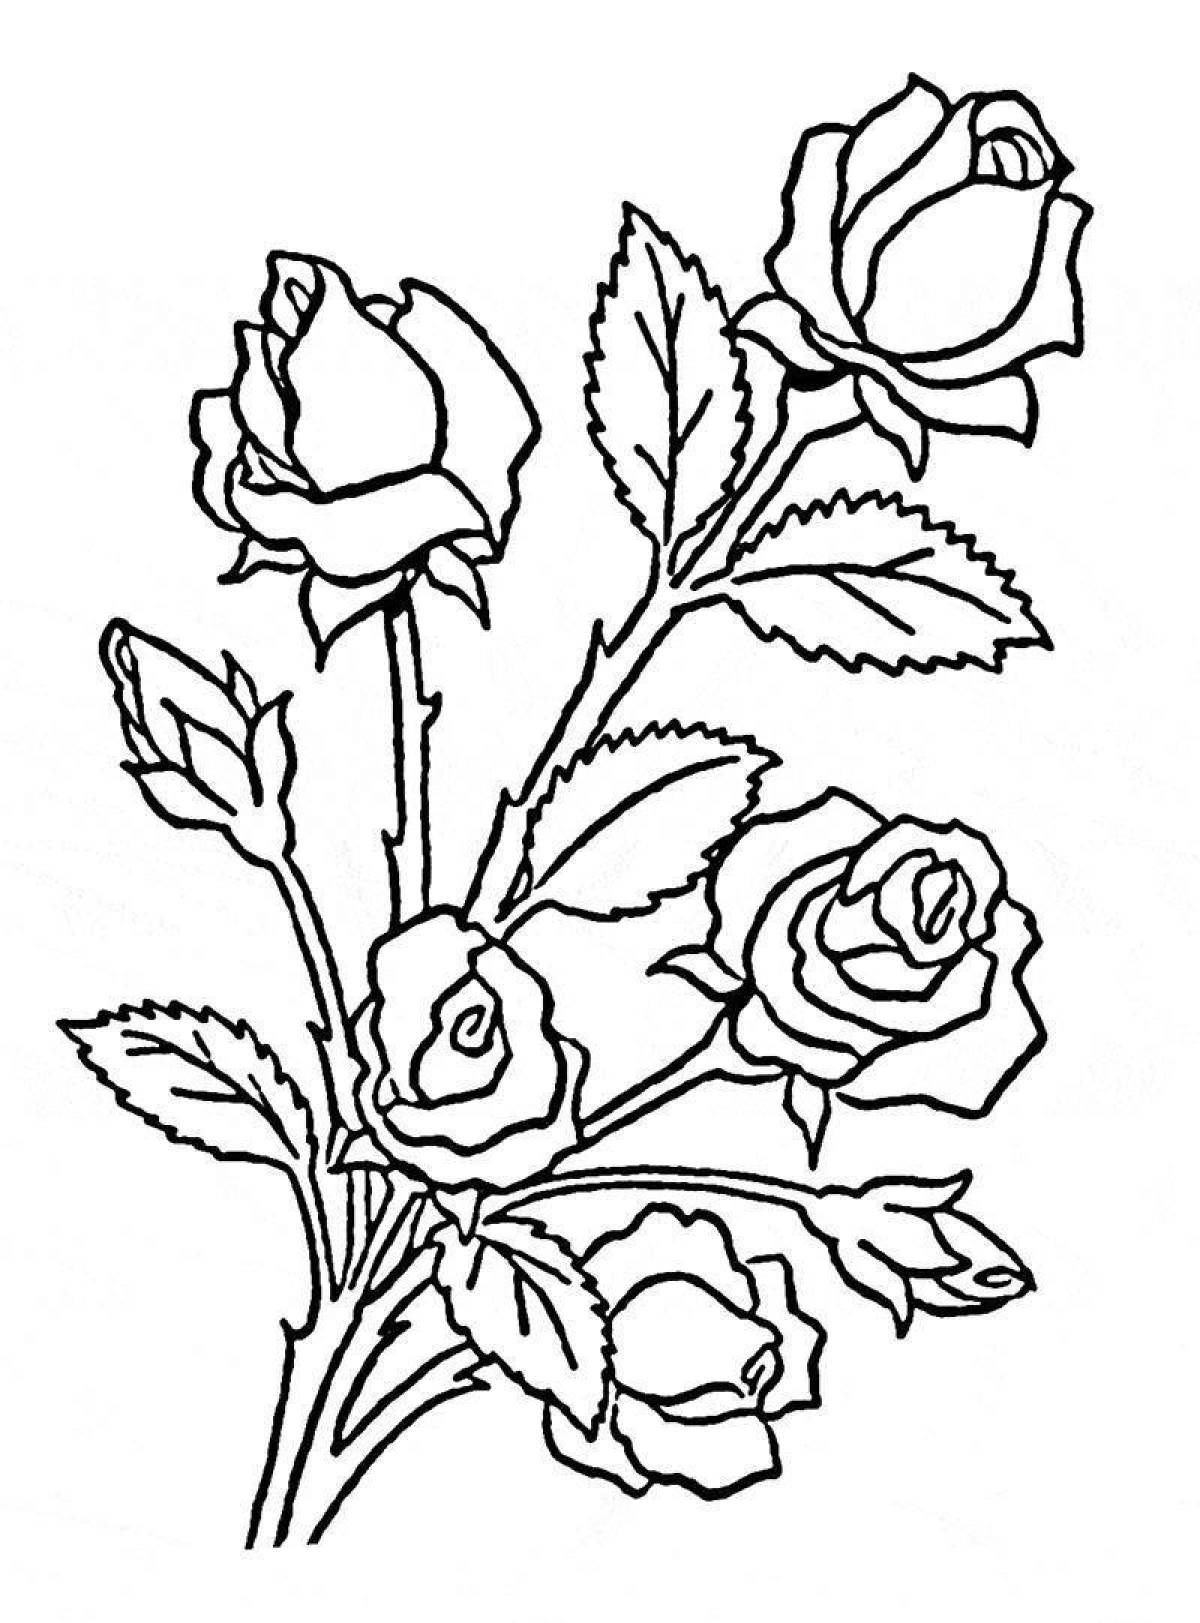 Coloring book playful bouquet of roses